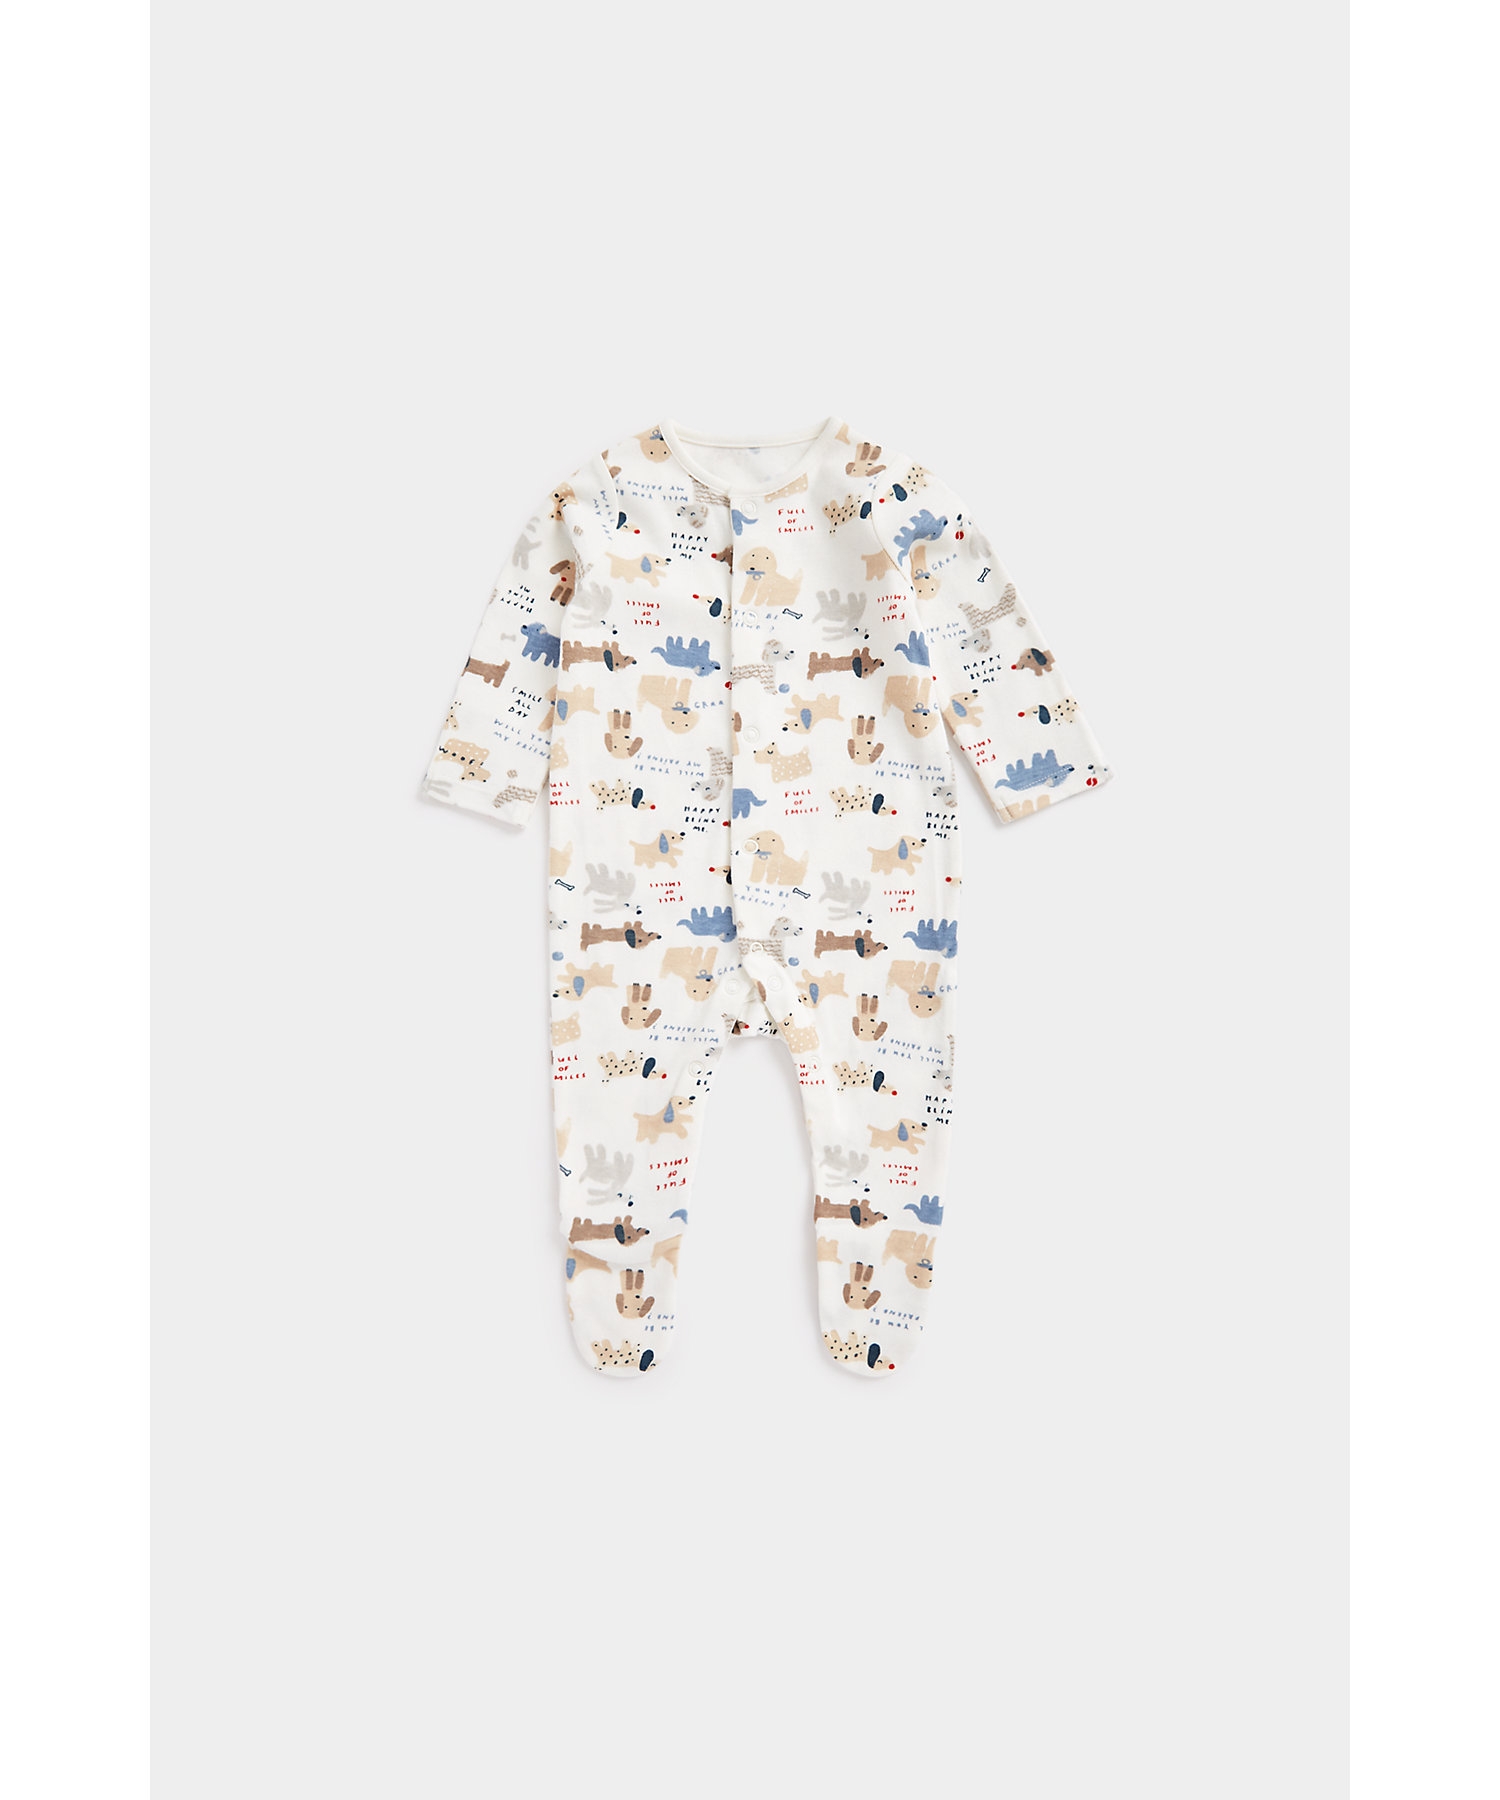 Unisex Full Sleeves Sleepsuits Front Open -Multicolor